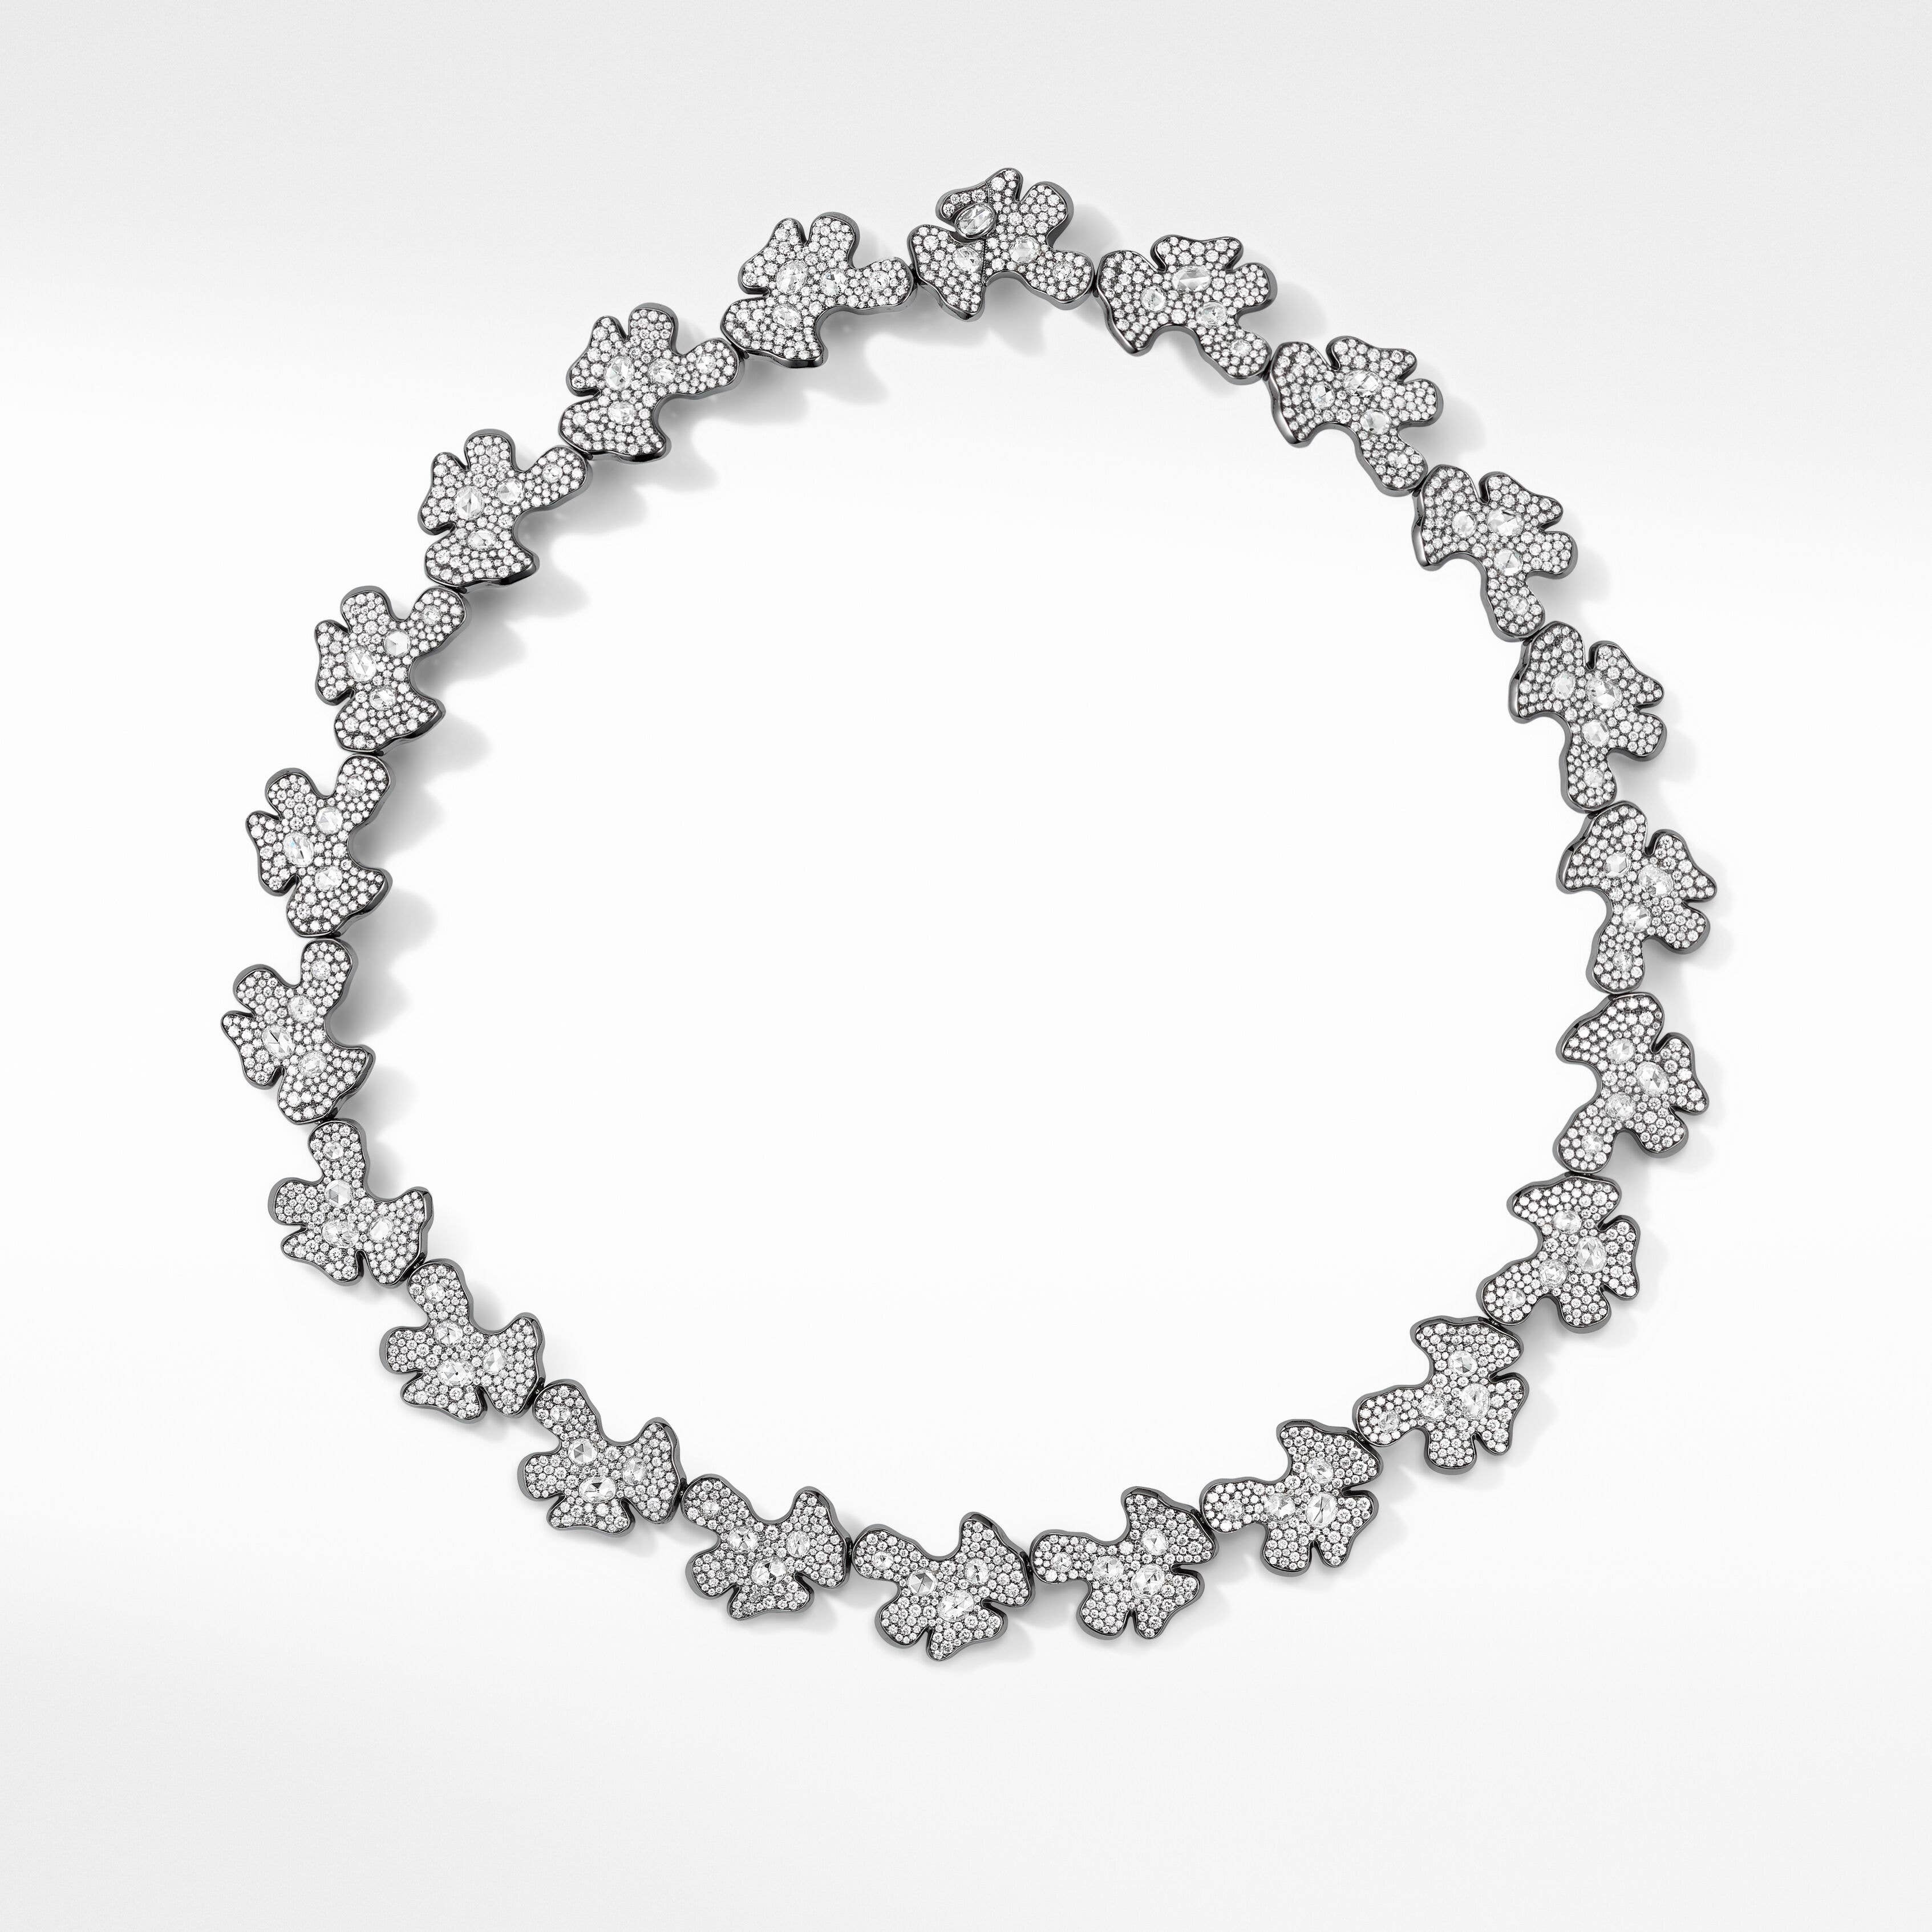 Night Petals Necklace in White Gold with Diamonds